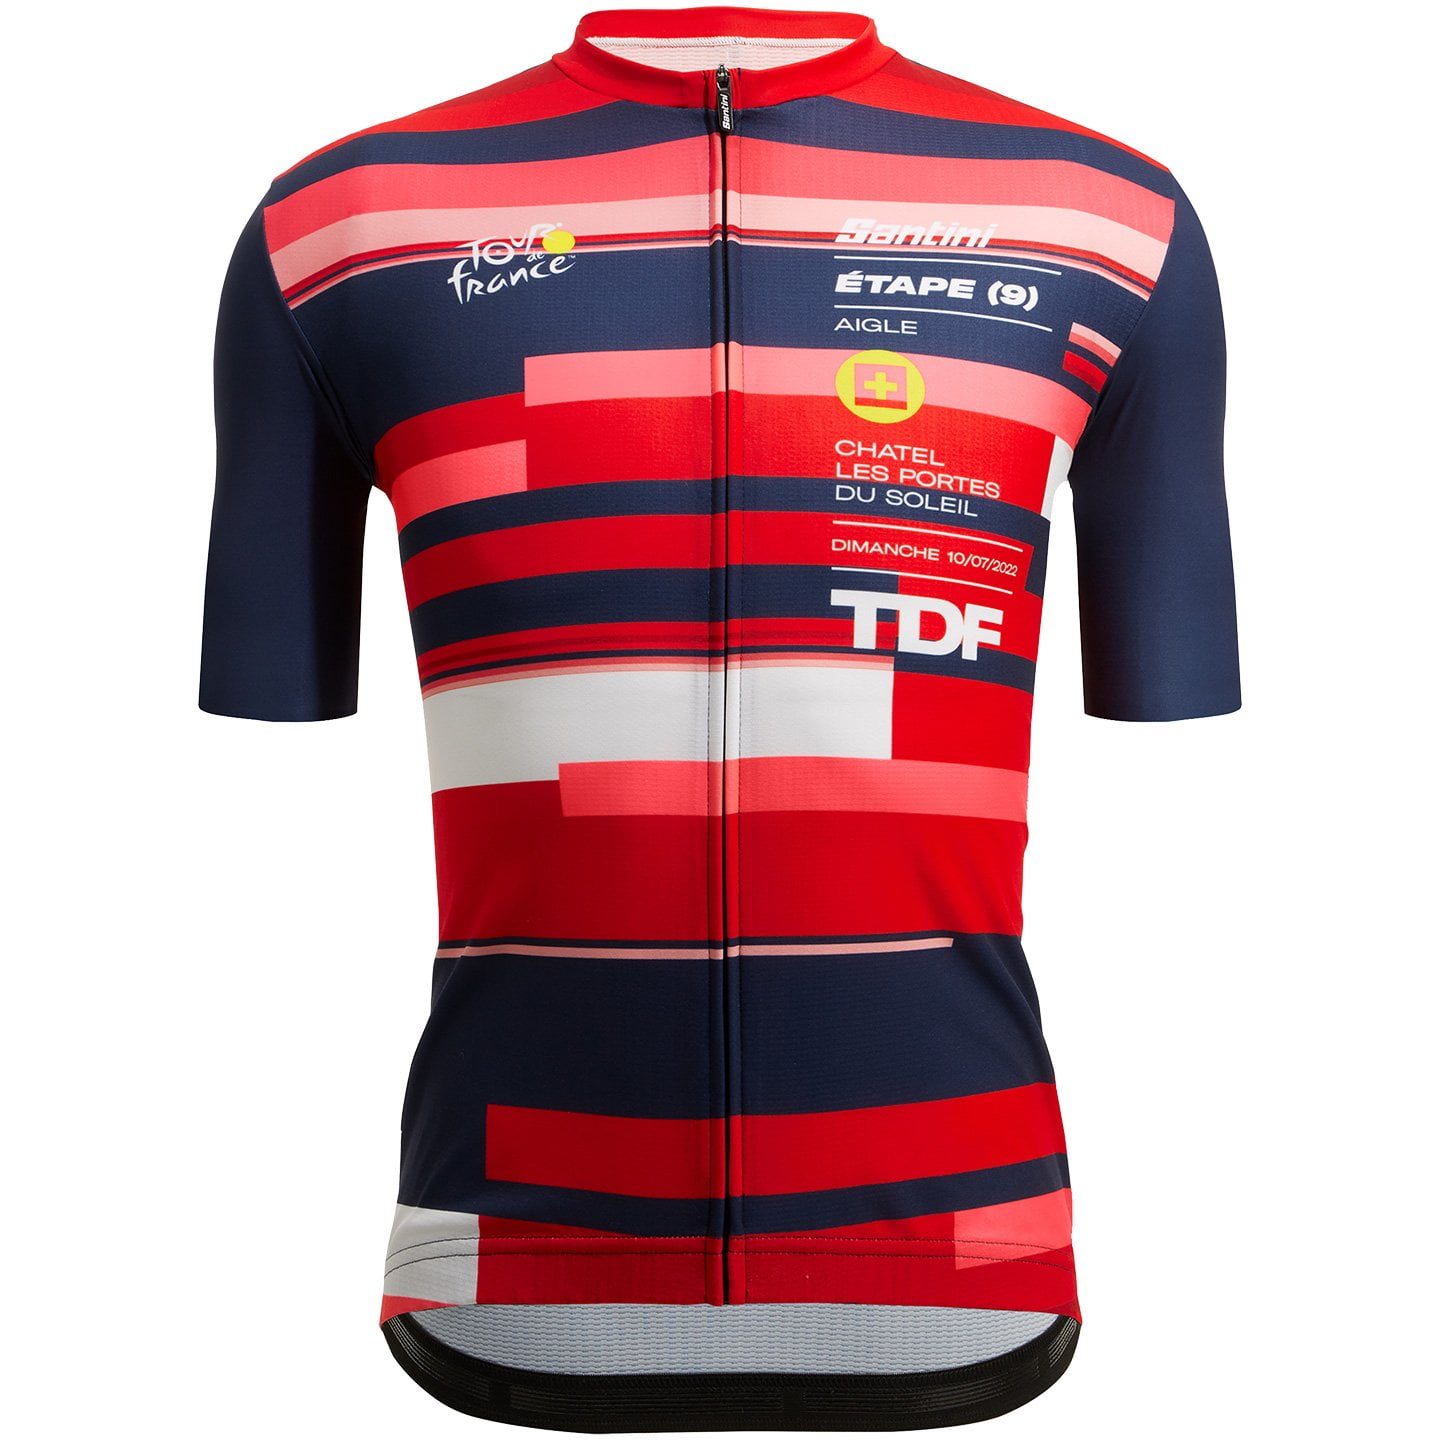 TOUR DE FRANCE Aigle-Chatel 2022 Short Sleeve Jersey, for men, size L, Cycling shirt, Cycle clothing